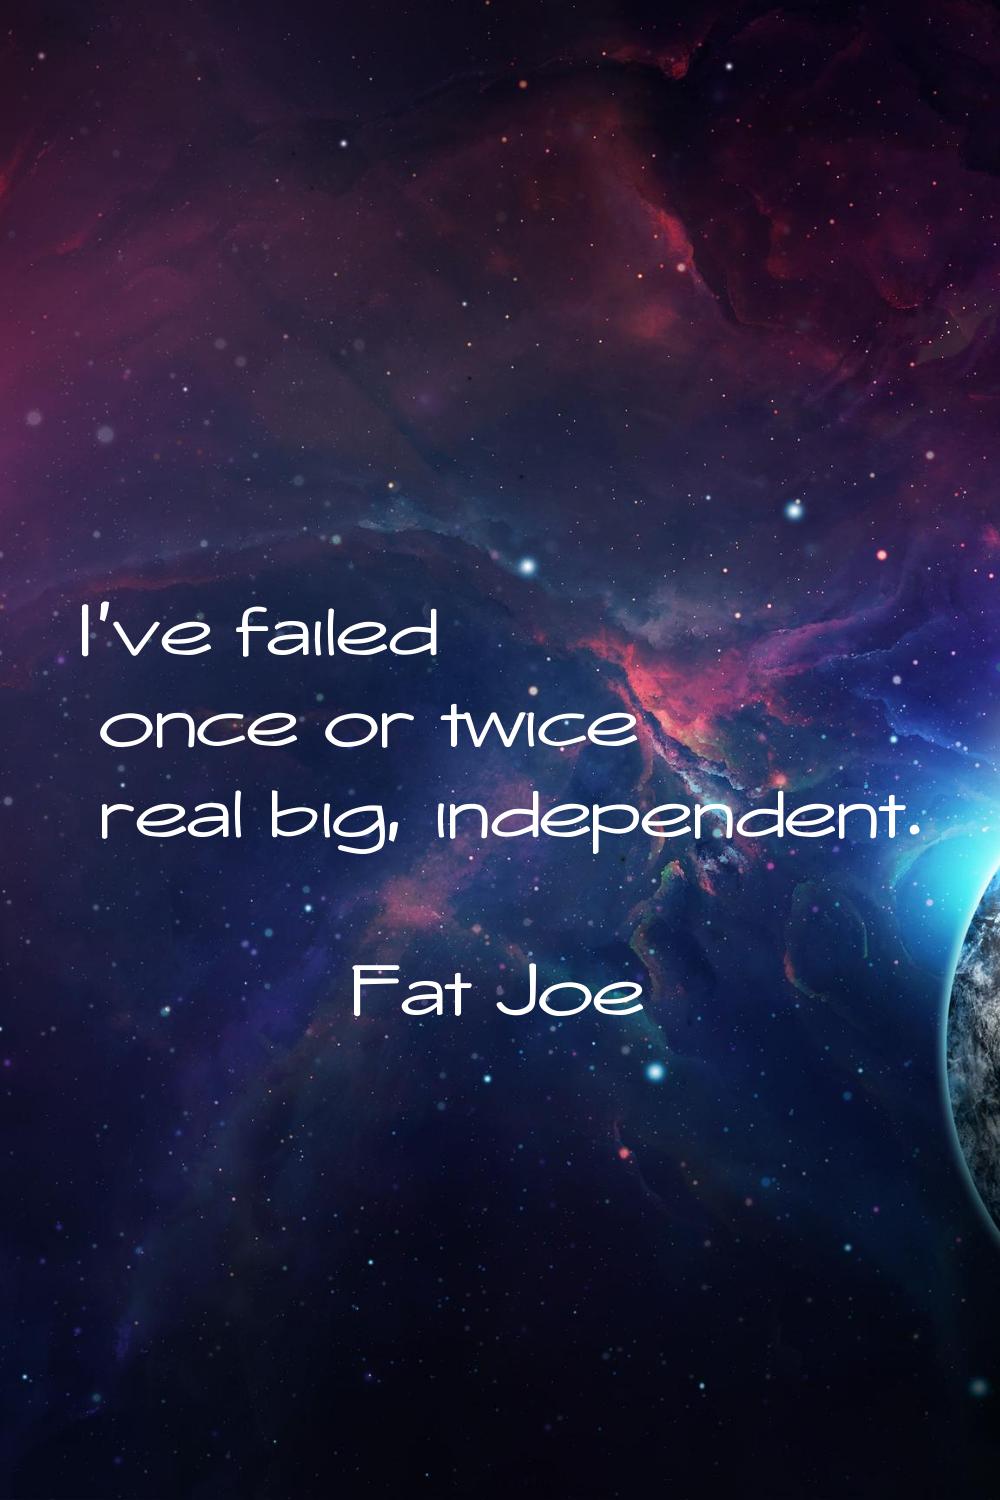 I've failed once or twice real big, independent.